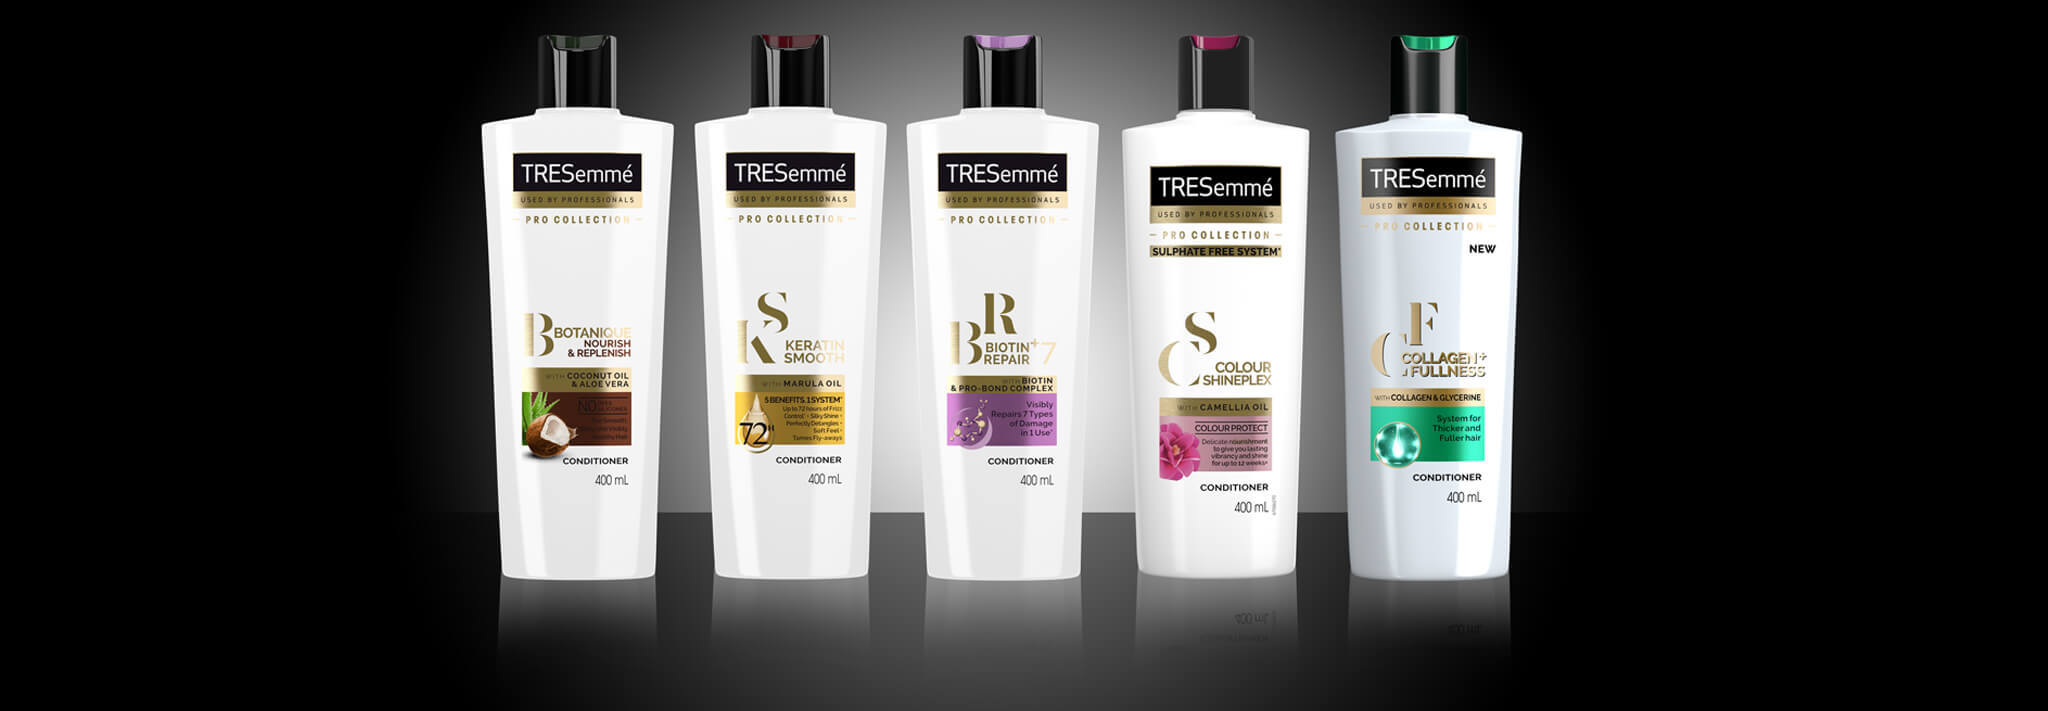 Black and White images of TRESemmé Conditioner Bottles